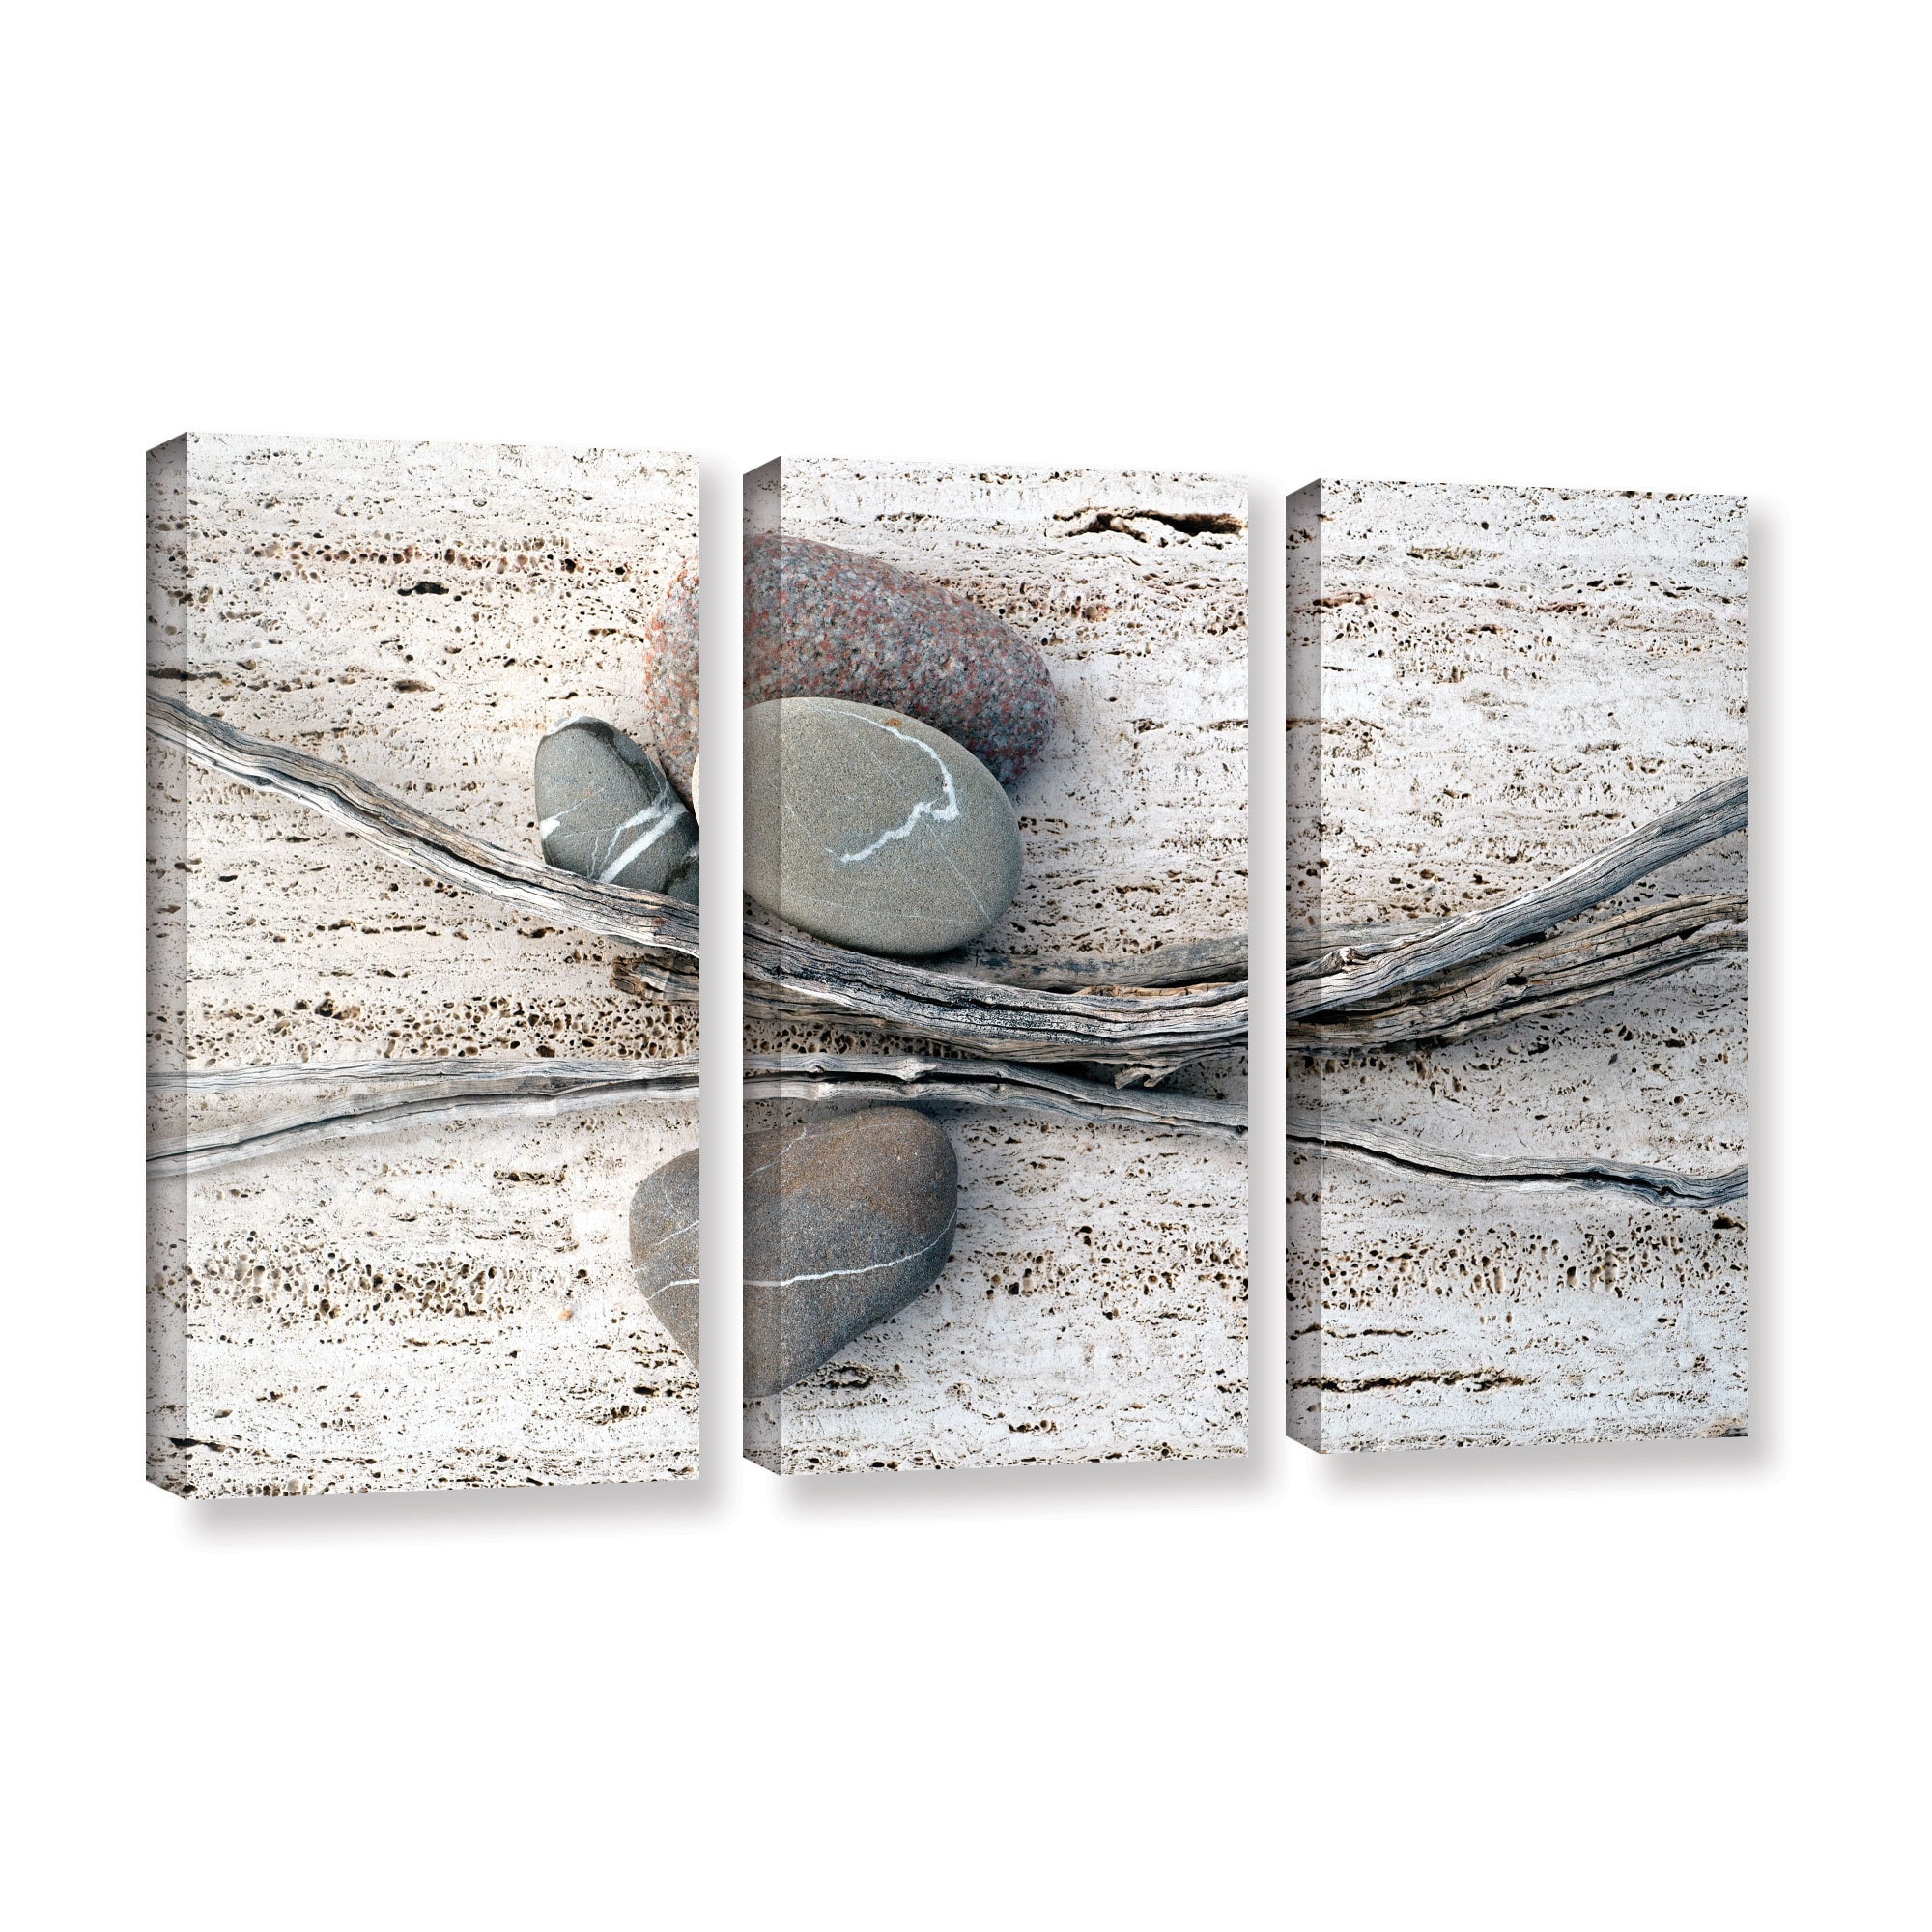 ArtWall Still Life Sticks Stones Gallery Wrapped Canvas Artwork by Elena Ray 16 by 24-Inch